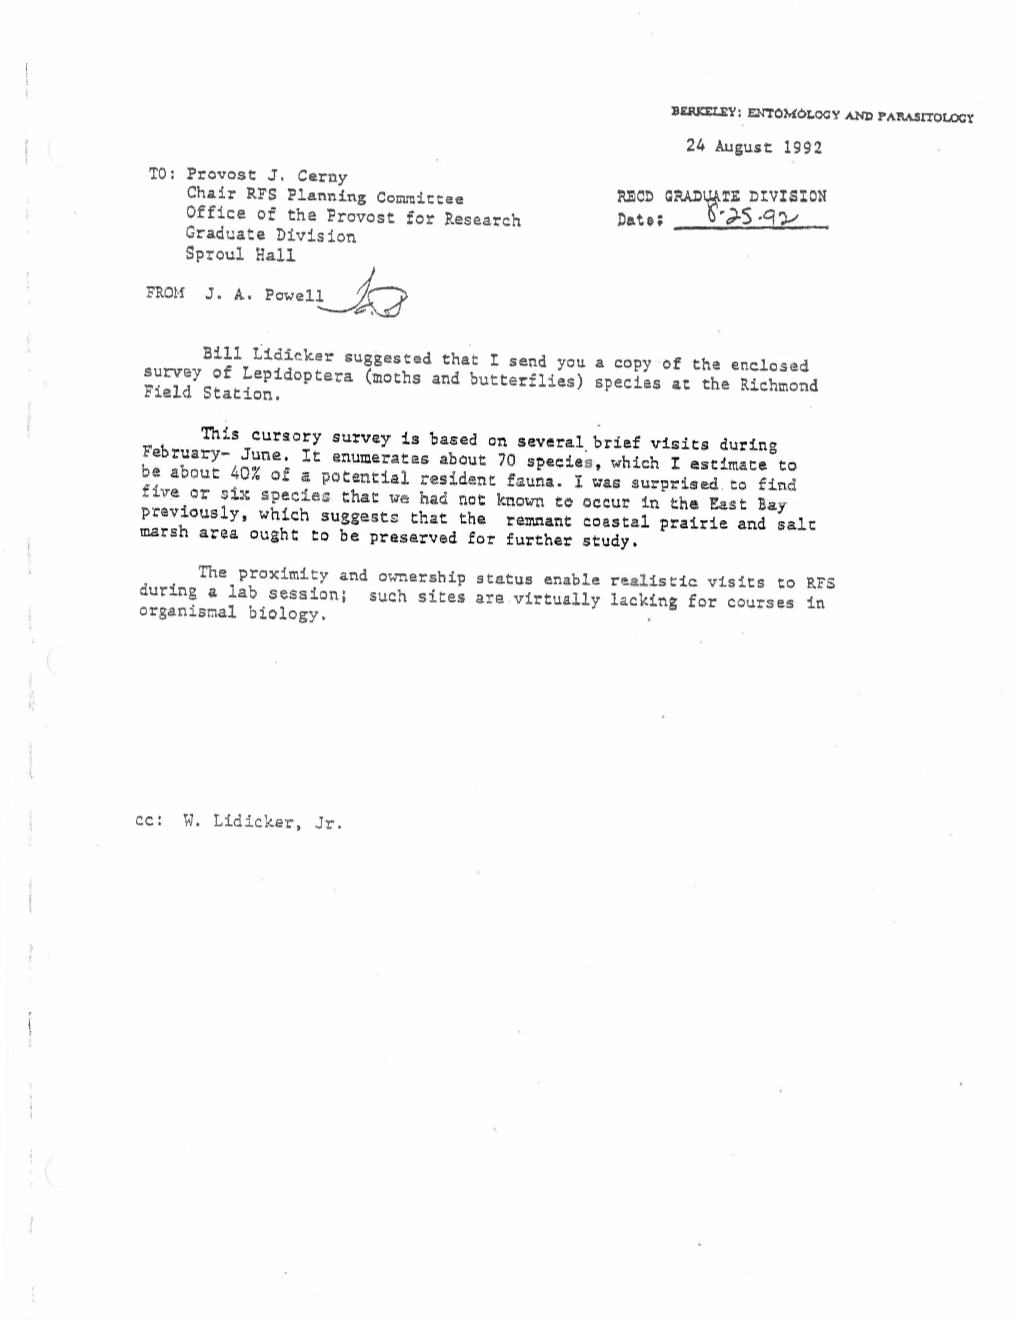 24 August 1992 TO: Provost J. Cerny Chair RFS Planning Coittee